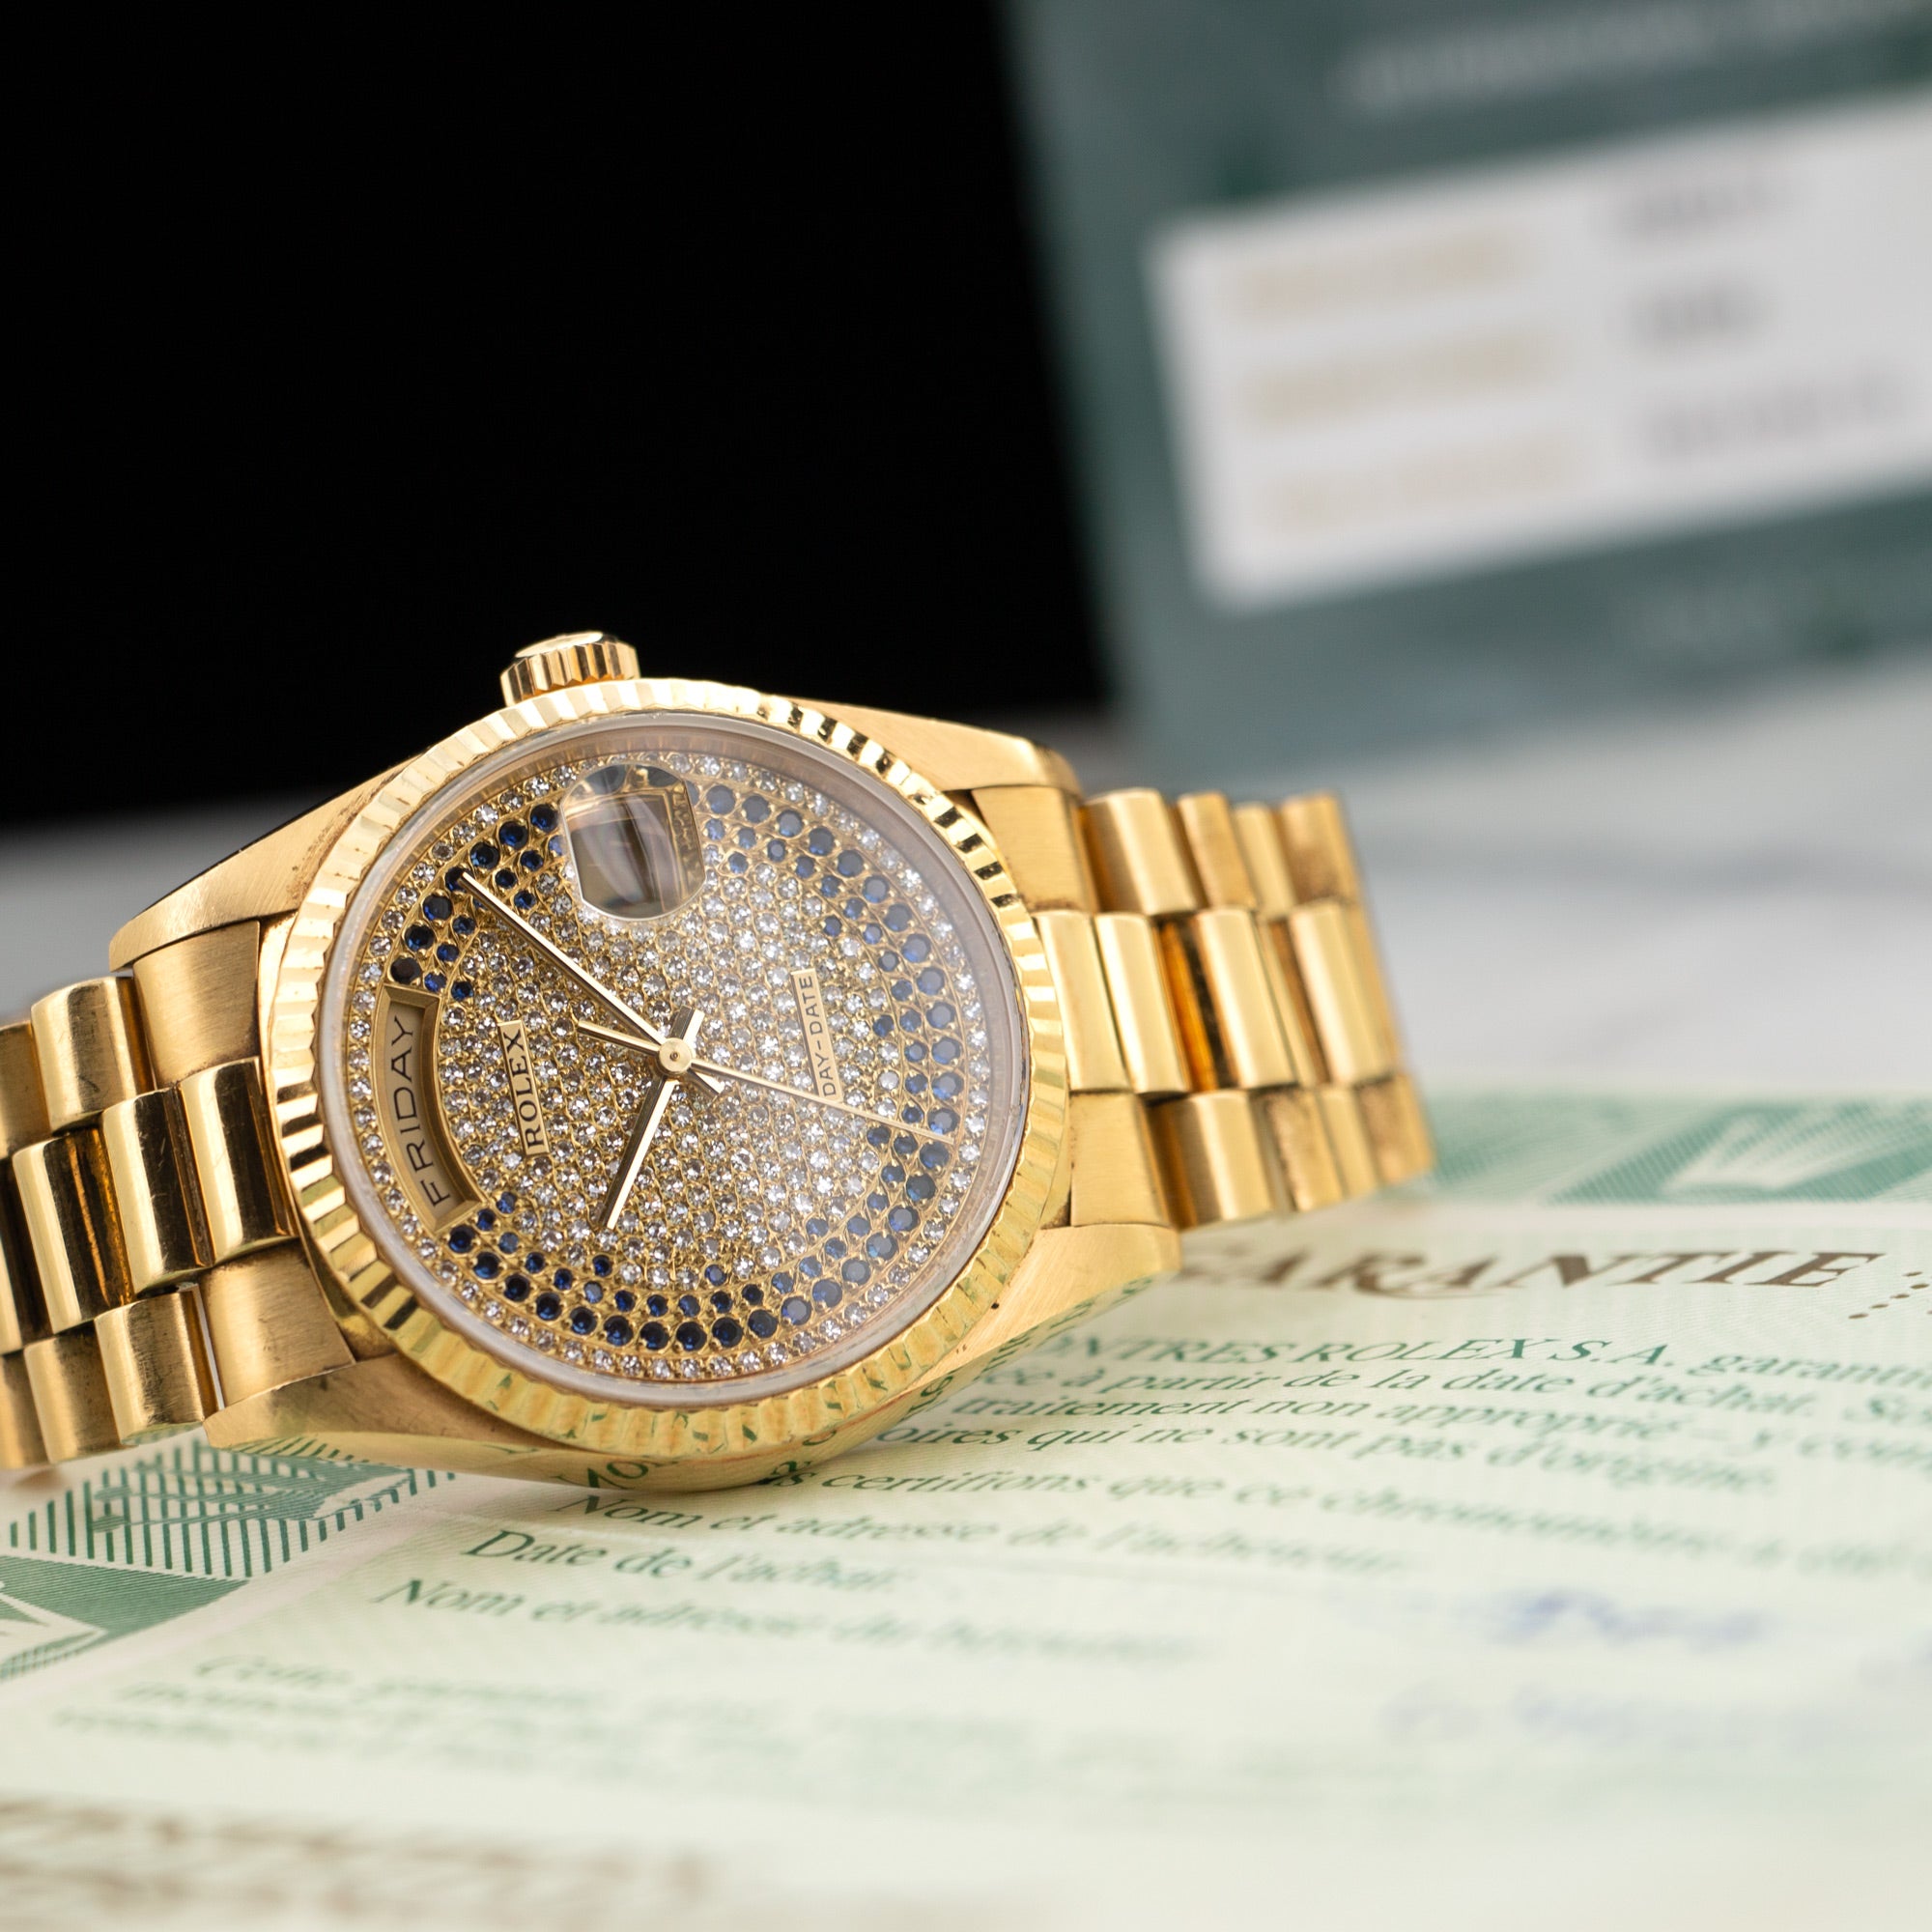 Rolex - Rolex Day-Date Yellow Gold with Pave Dial Ref. 18238 - The Keystone Watches